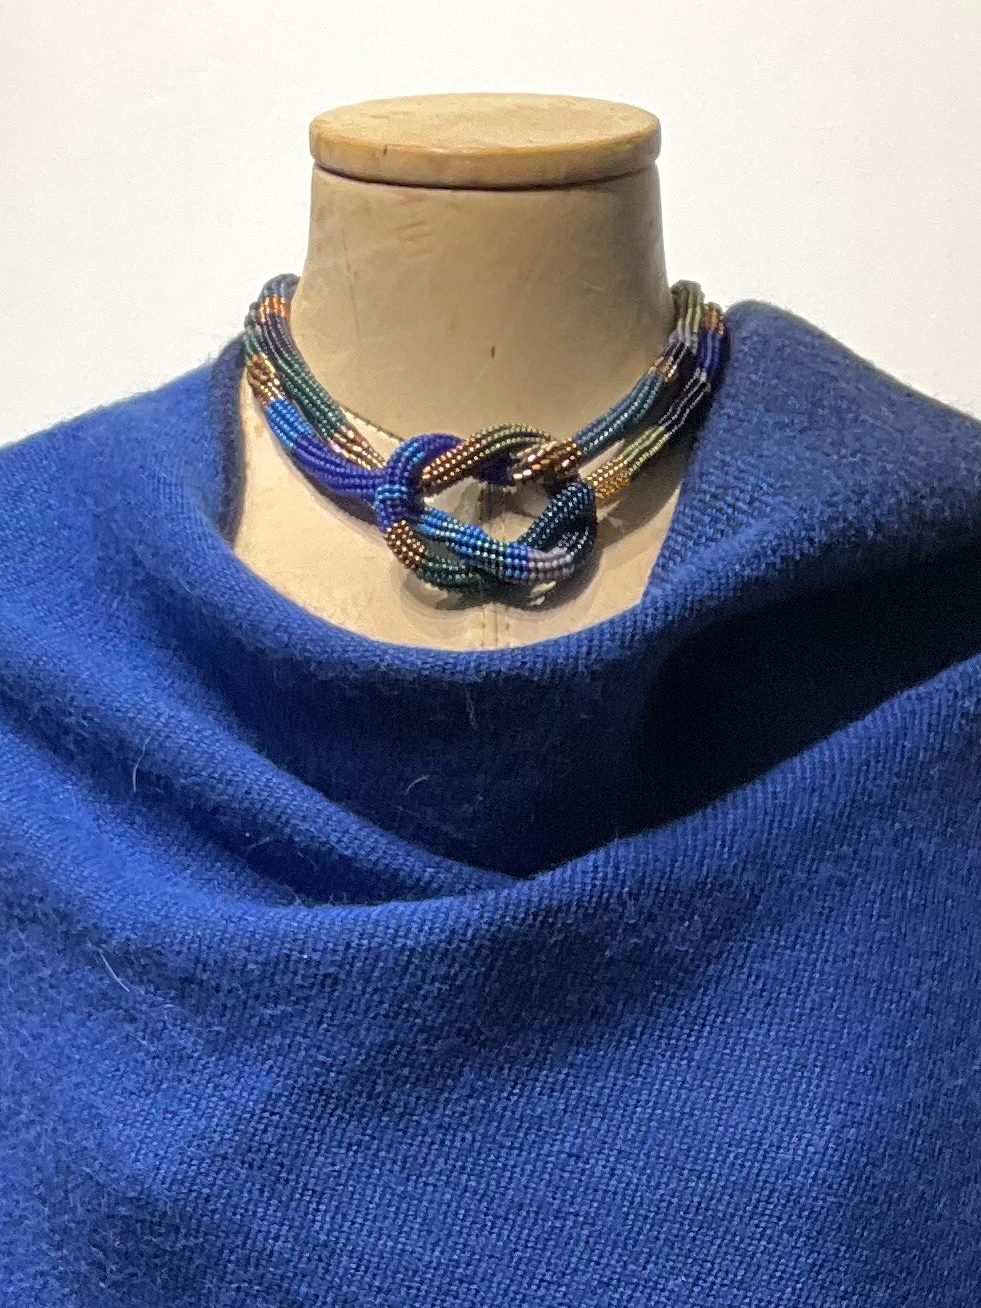 Julie Powell, Square Knot Necklace